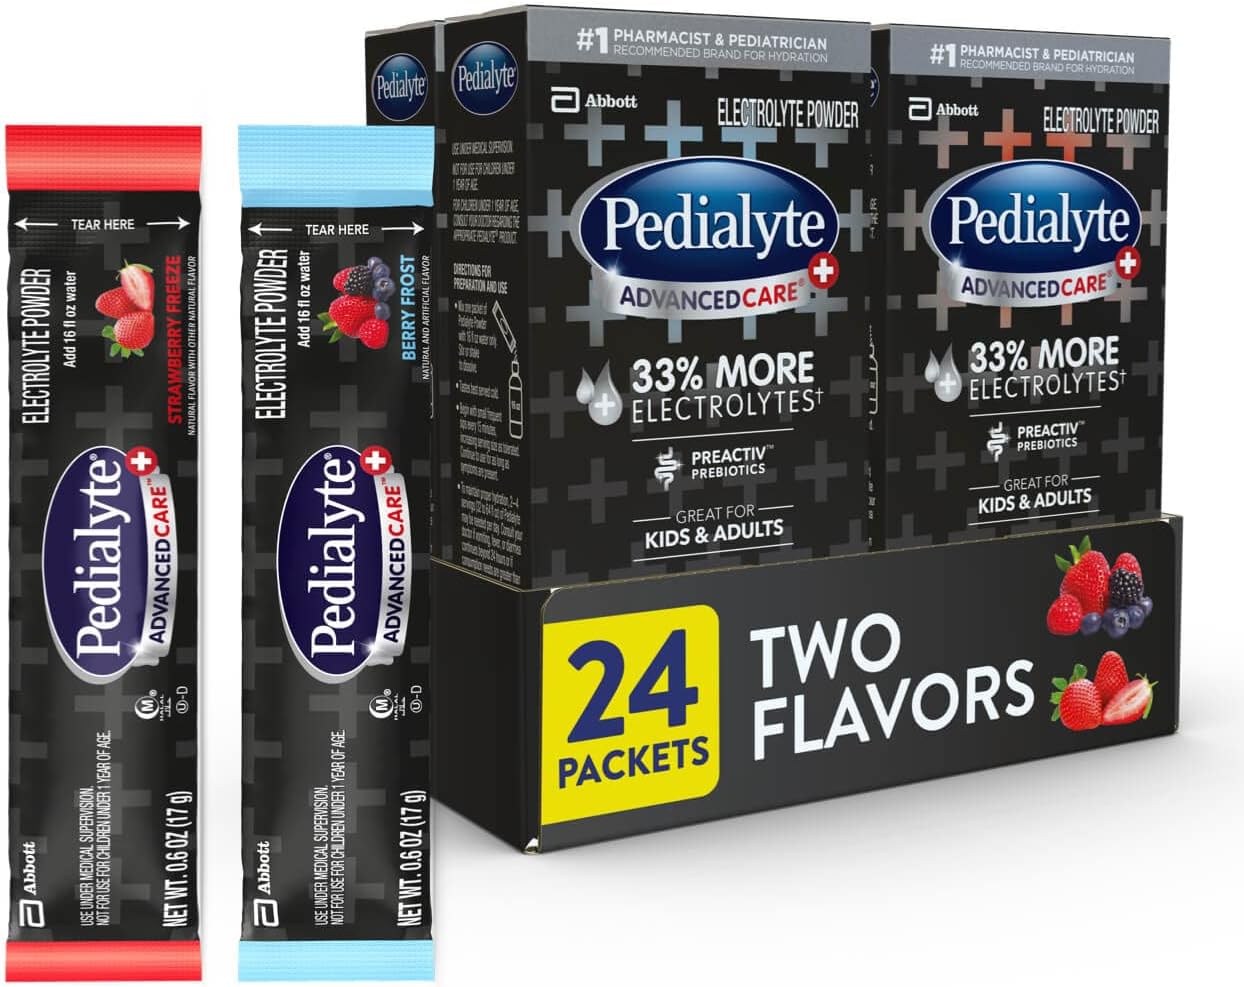 Pedialyte AdvancedCare Plus Electrolyte Powder Packs with 33% more ele